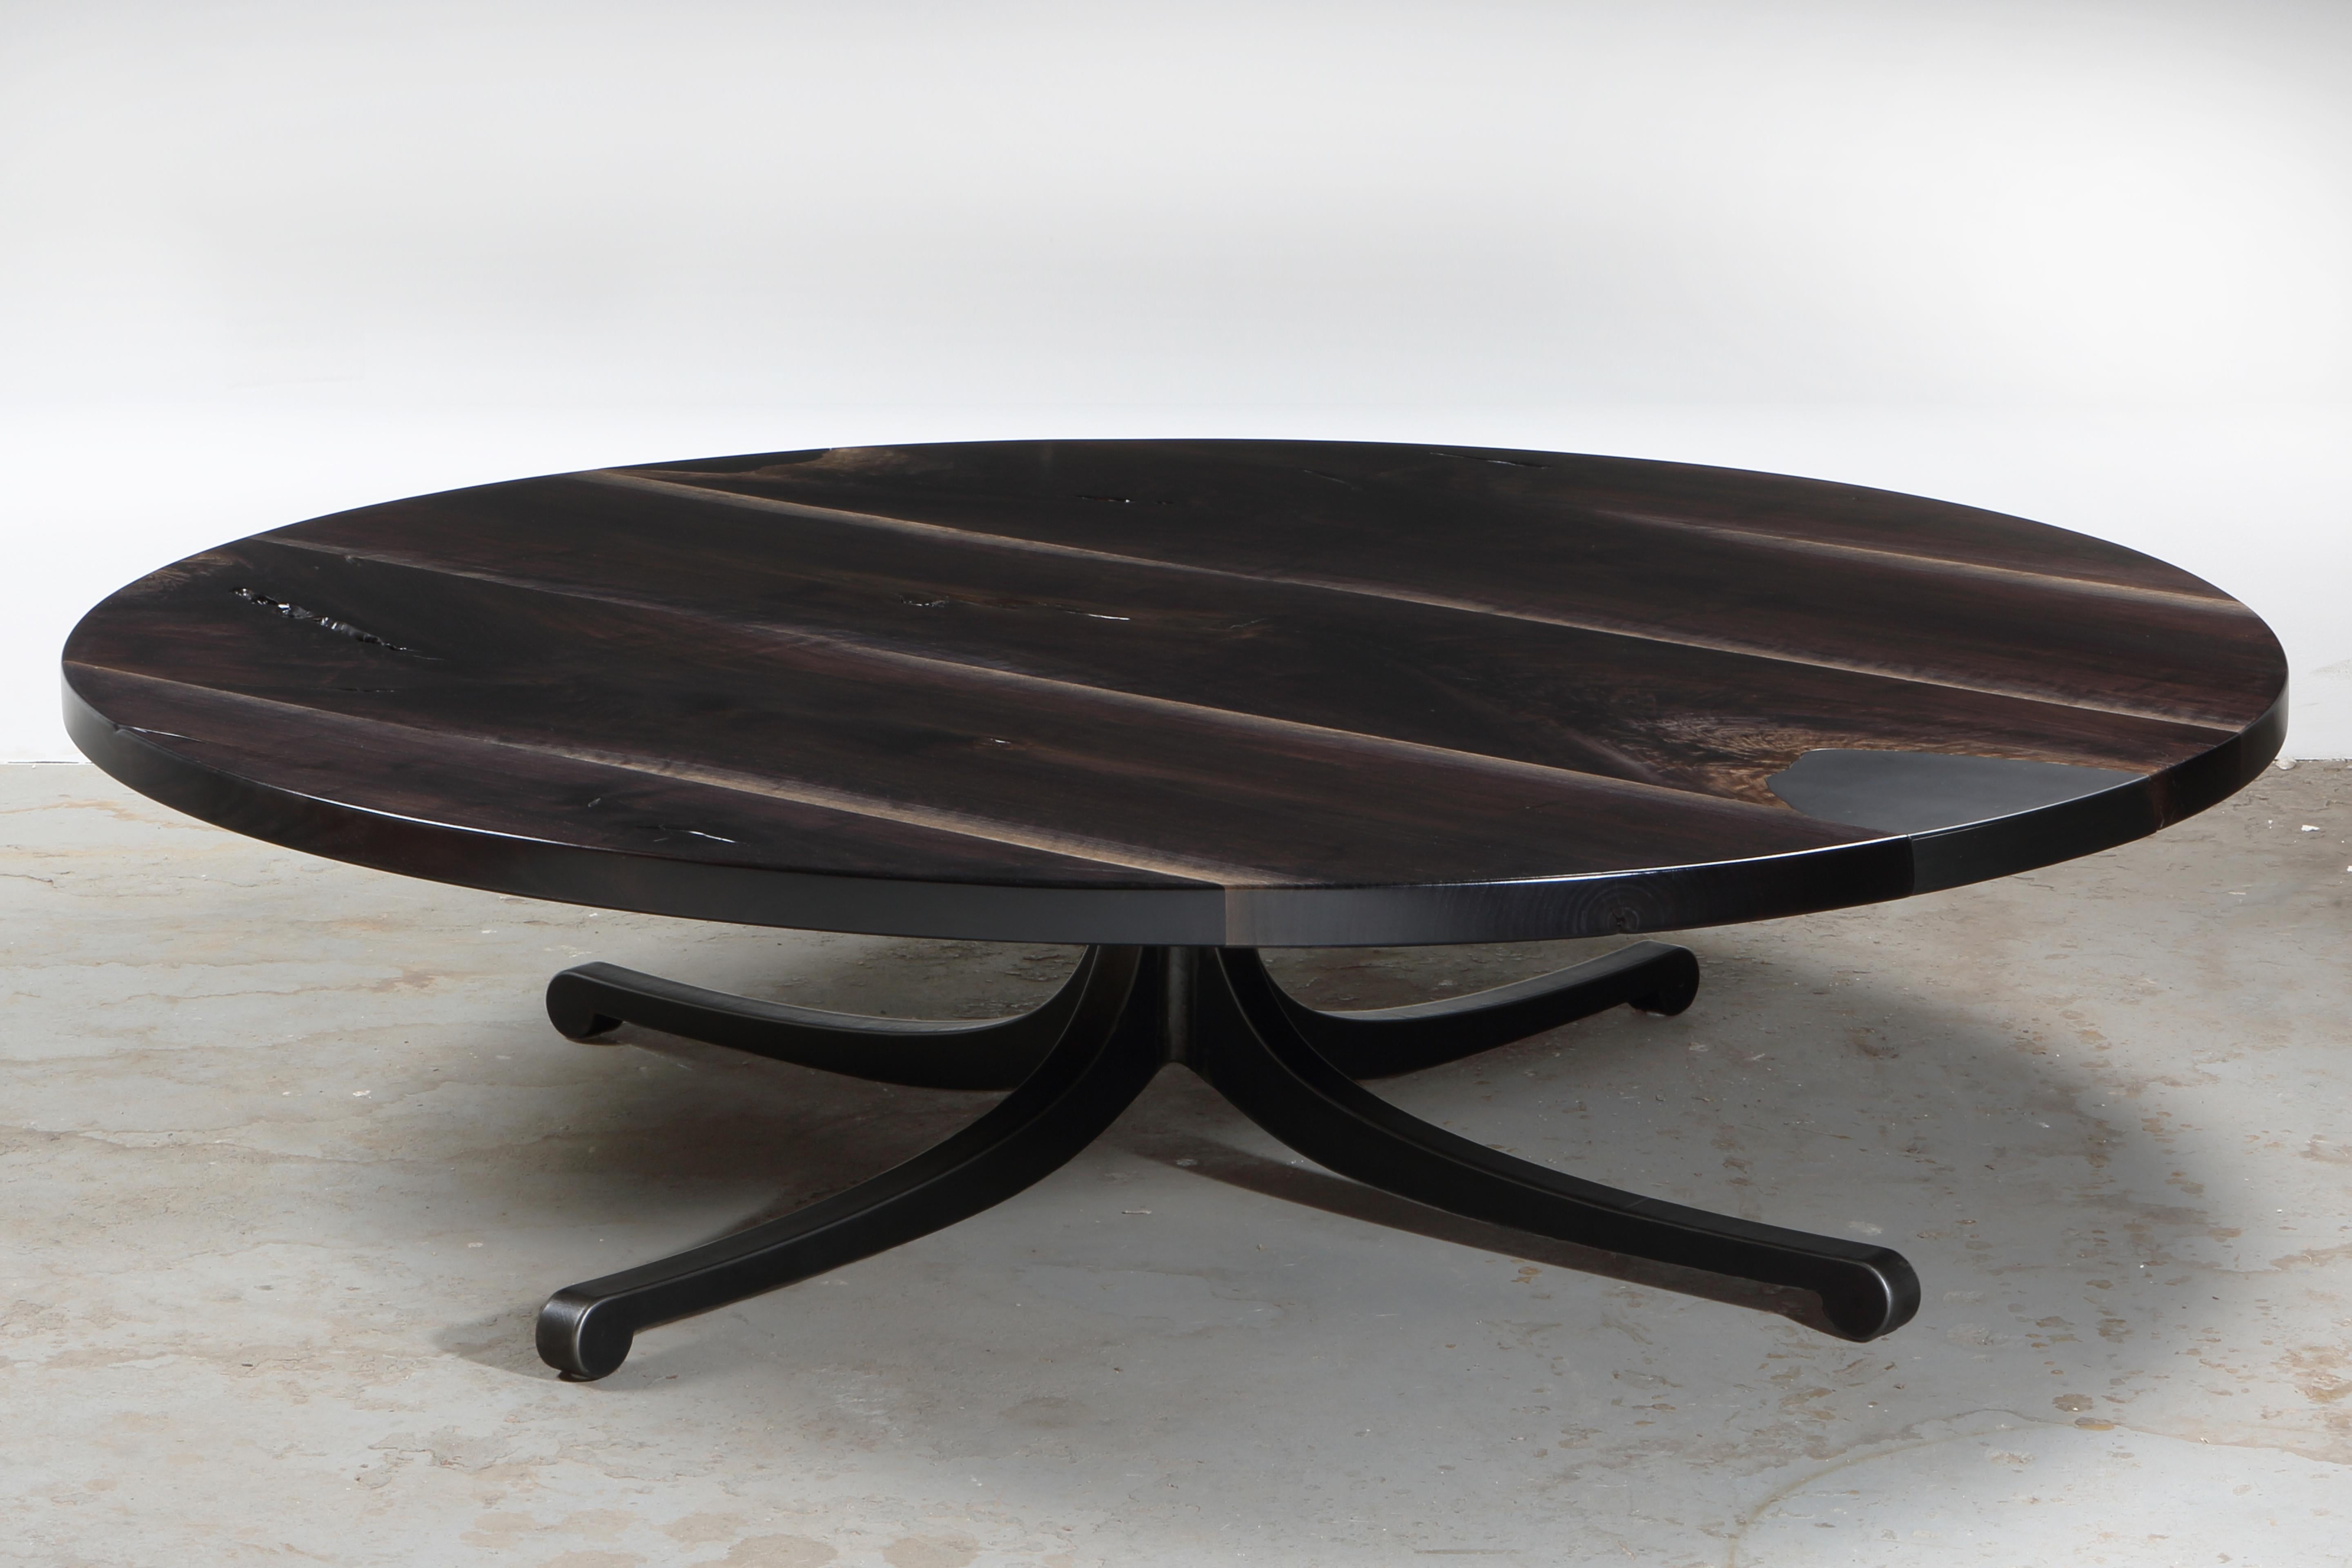 A single slab of highly figured walnut lends a celestial effect to the top of this exquisite serif coffee table. Grain matched steel inlay, with removable steel plate revealing hidden storage. Signature serif leg, shown in raw flame cut finish.